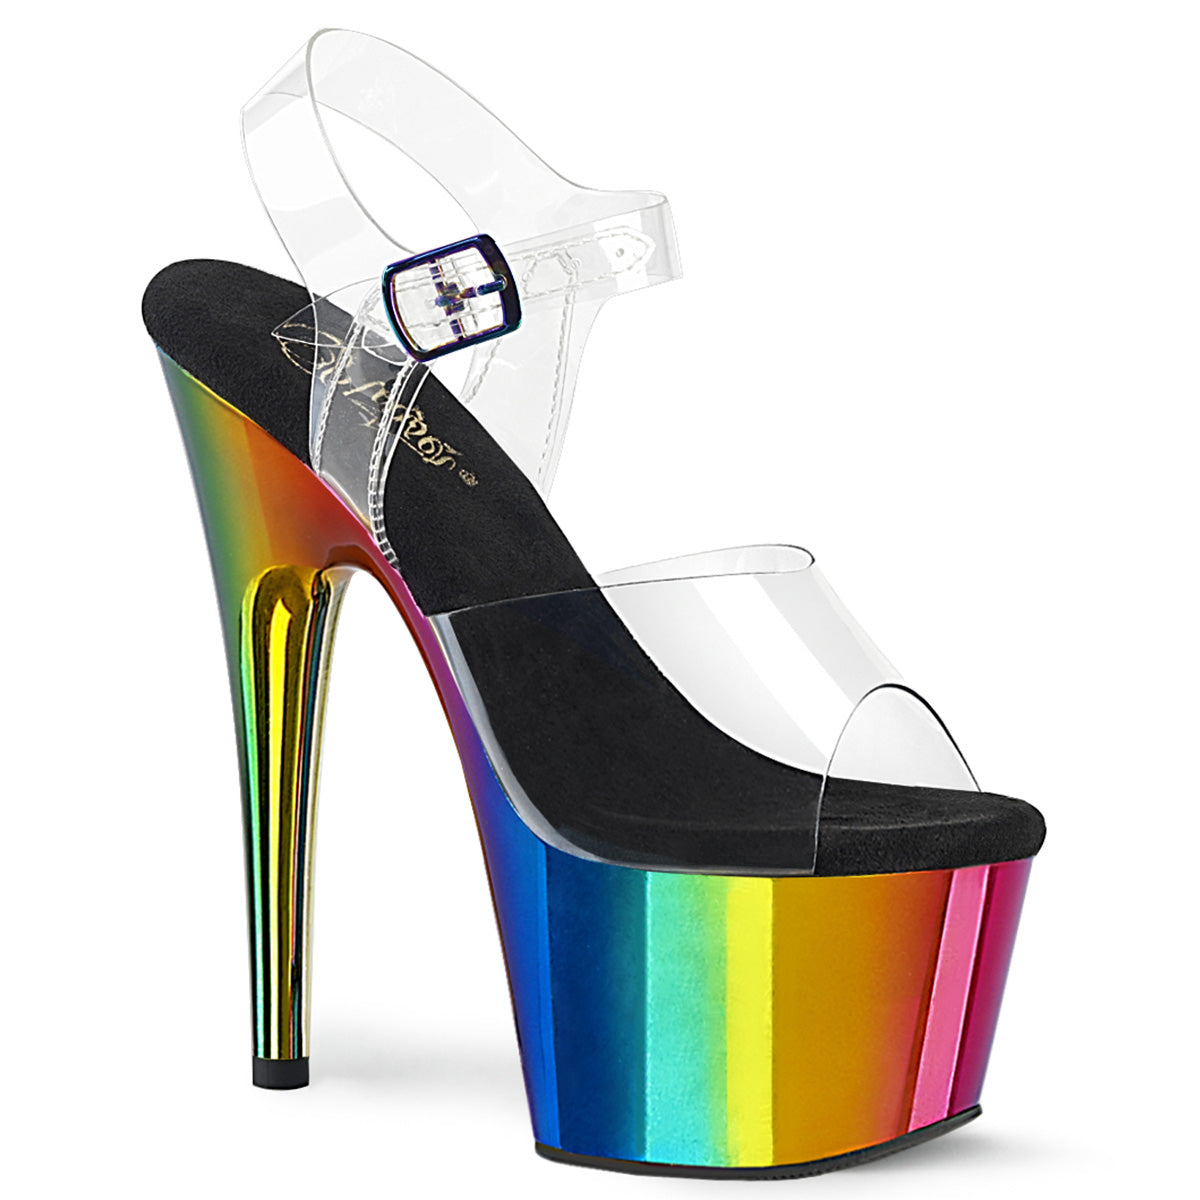 Pleaser ADORE-708RC Clear-Rainbow Chrome 7 Inch (178mm) Heel, 2 3/4 Inch (70mm) Platform Ankle Strap Sandal Featuring Rainbow Chrome Plated Platform Bottom